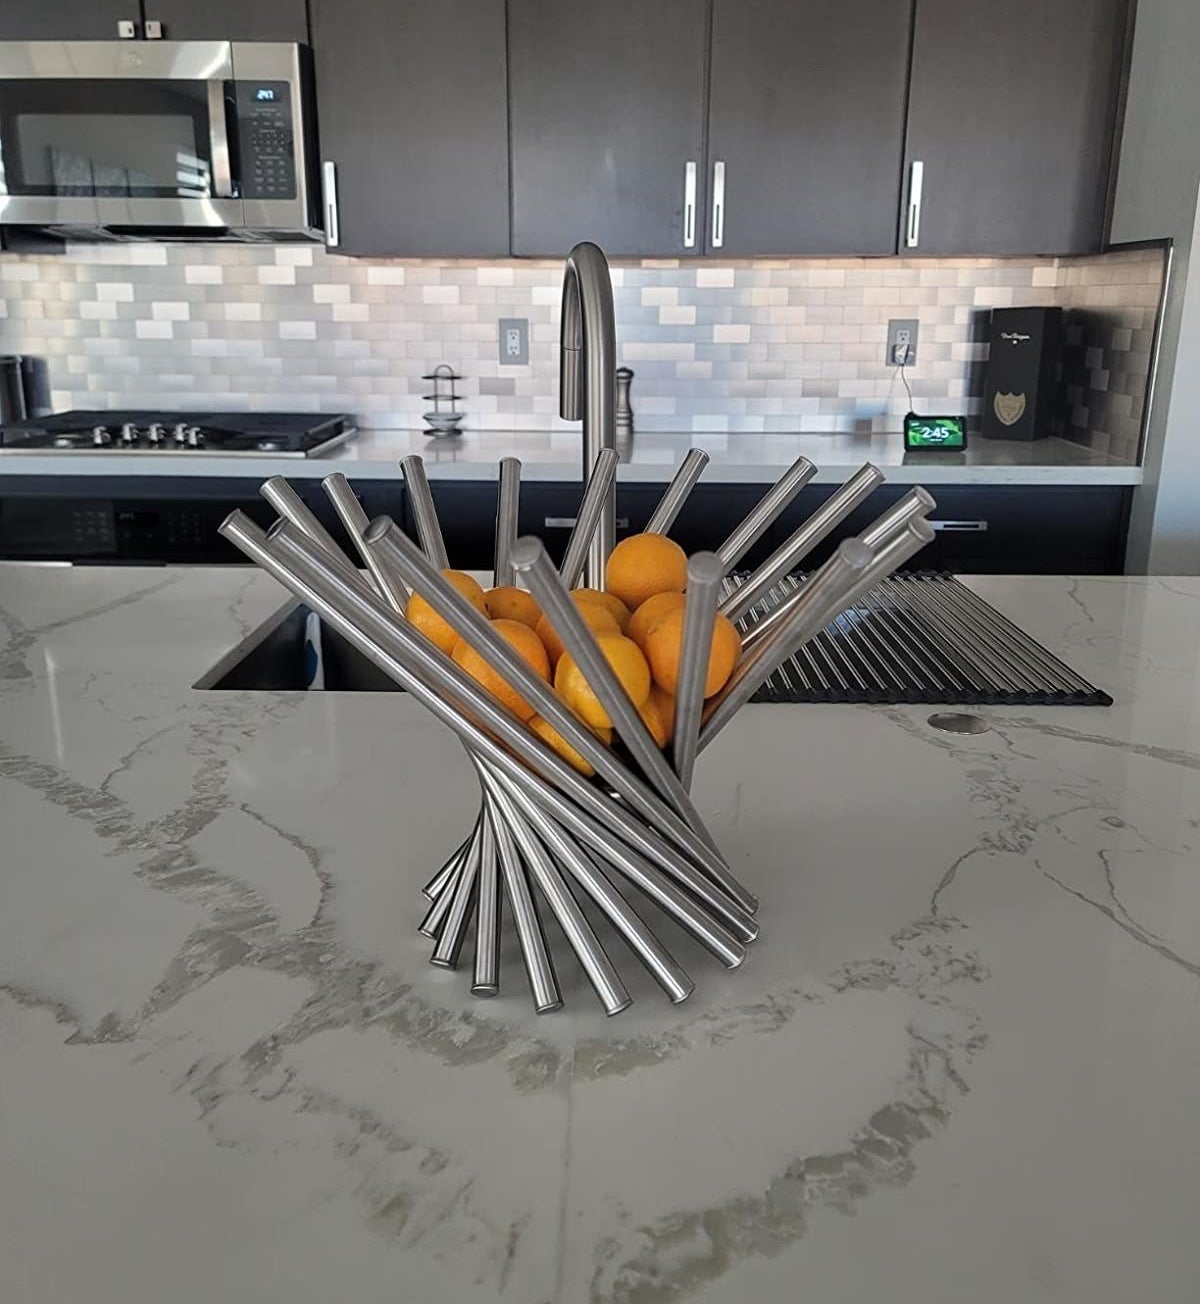 reviewer image of oranges inside the stainless steel fruit holder